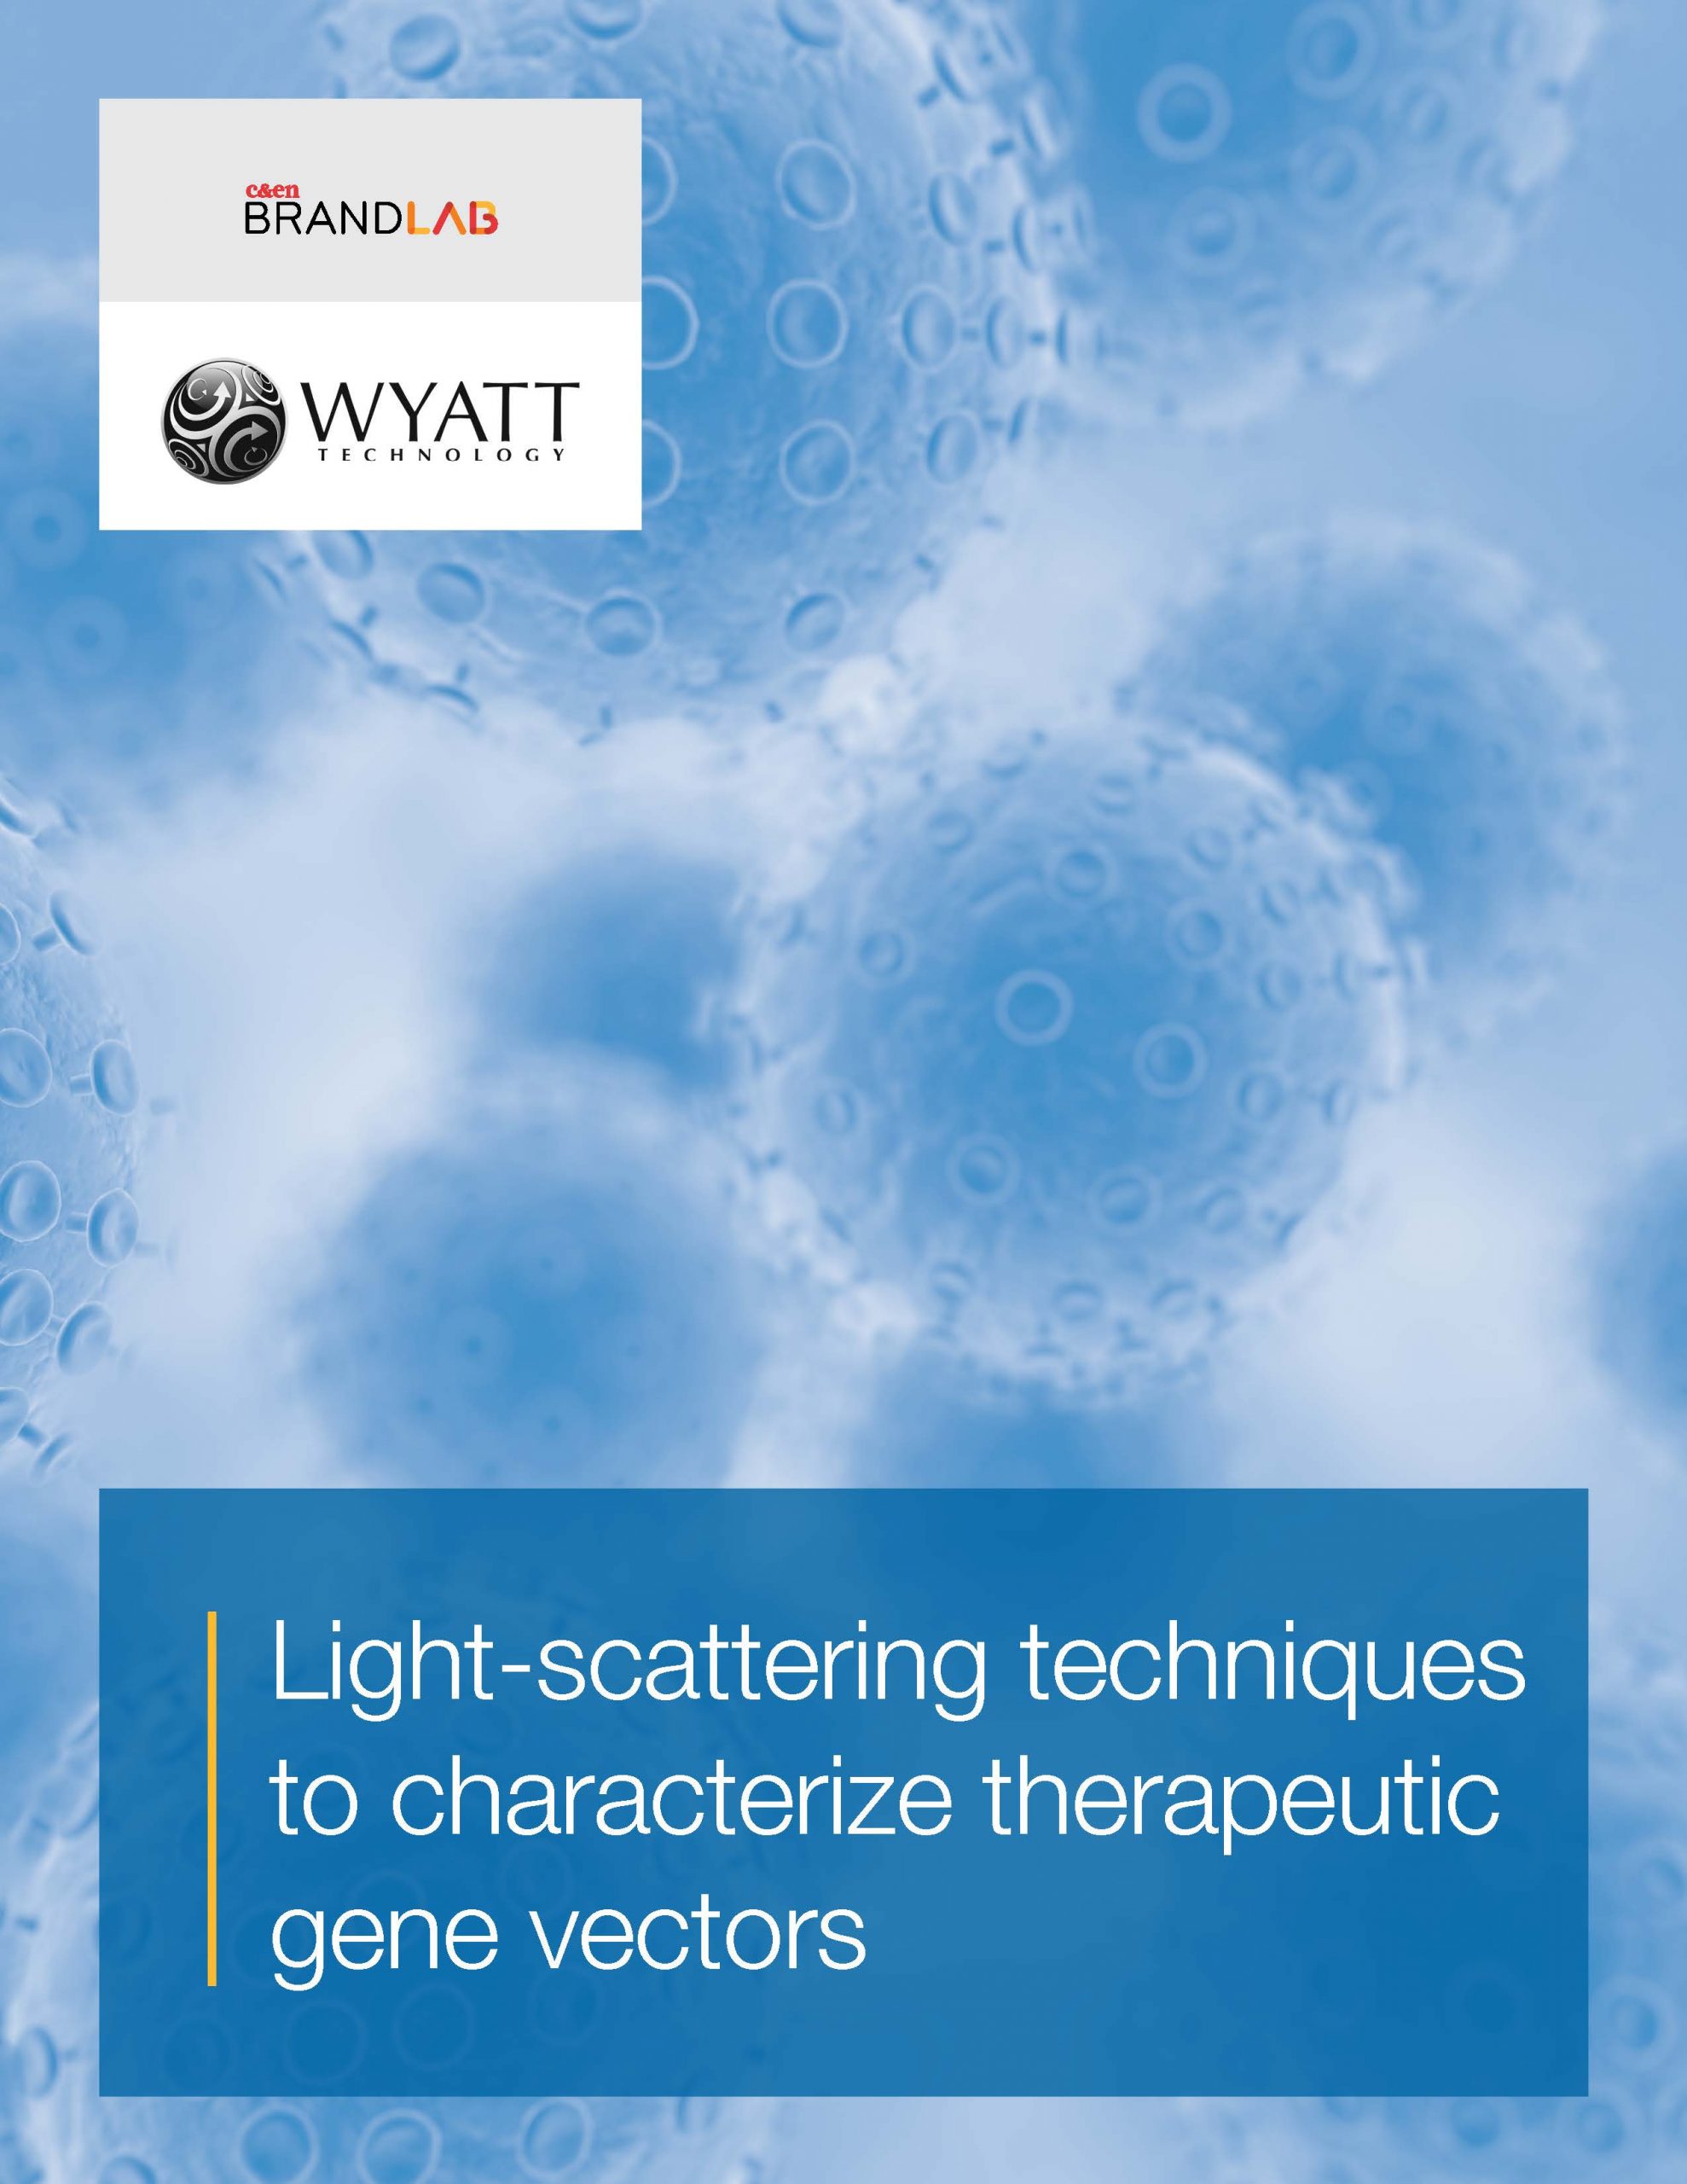 Light-scattering Techniques to Characterize Therapeutic Gene Vectors eBook Request